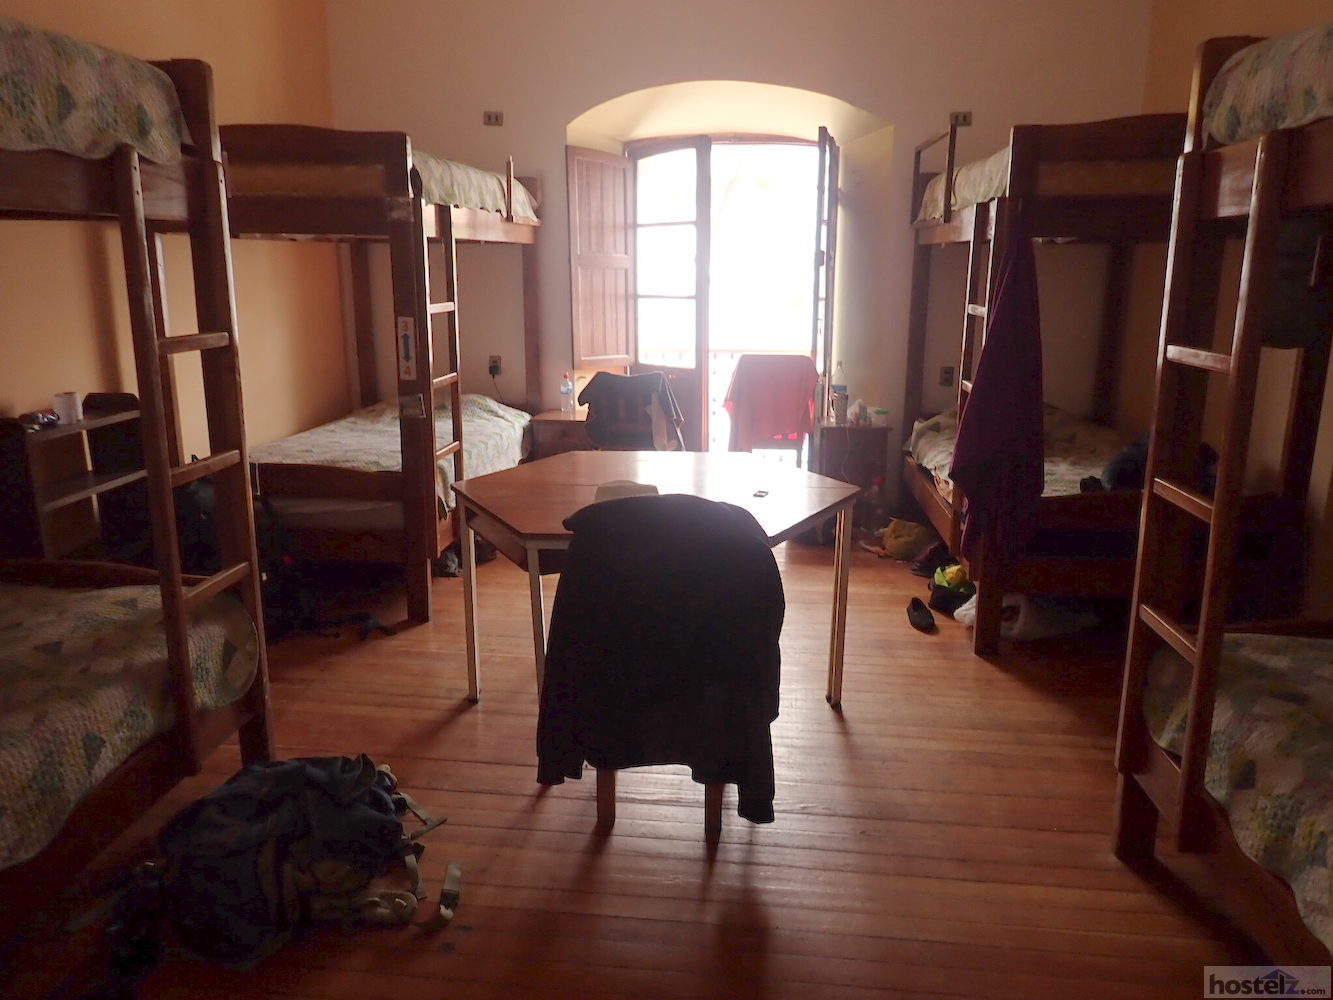 The eight-bed dorm